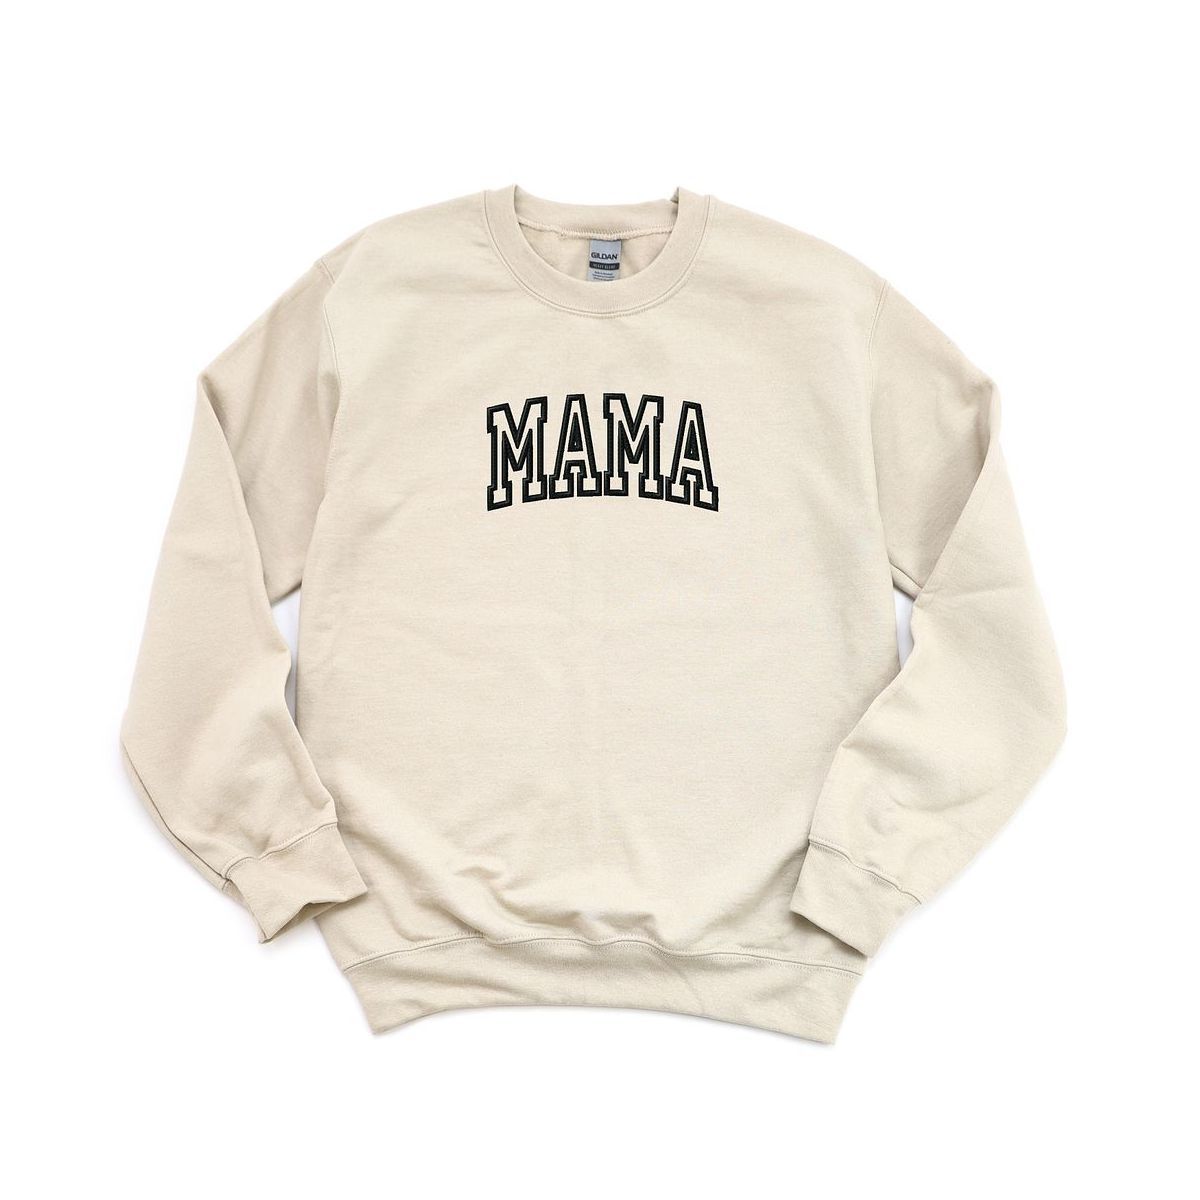 Simply Sage Market Women's Graphic Sweatshirt Embroidered Mama- White Embroidery | Target